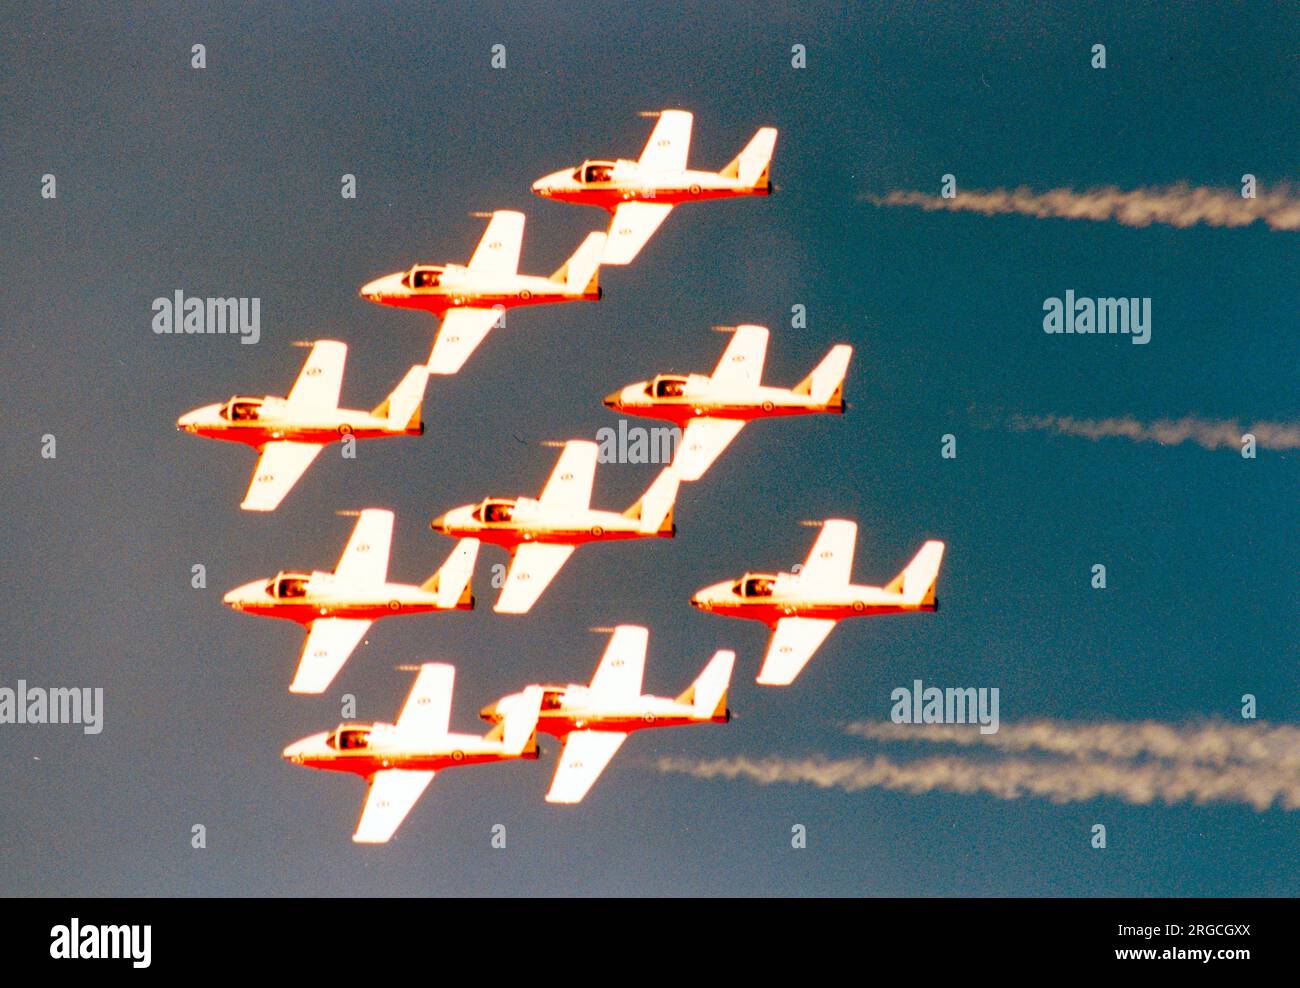 Canadian Armed Forces - Canadair CT-114 Tutors of the Snowbirds formation aerobatic team, at the Nellis Air Force Base '50th Anniversary of the USAF' airshow on 26 April 1997. Stock Photo